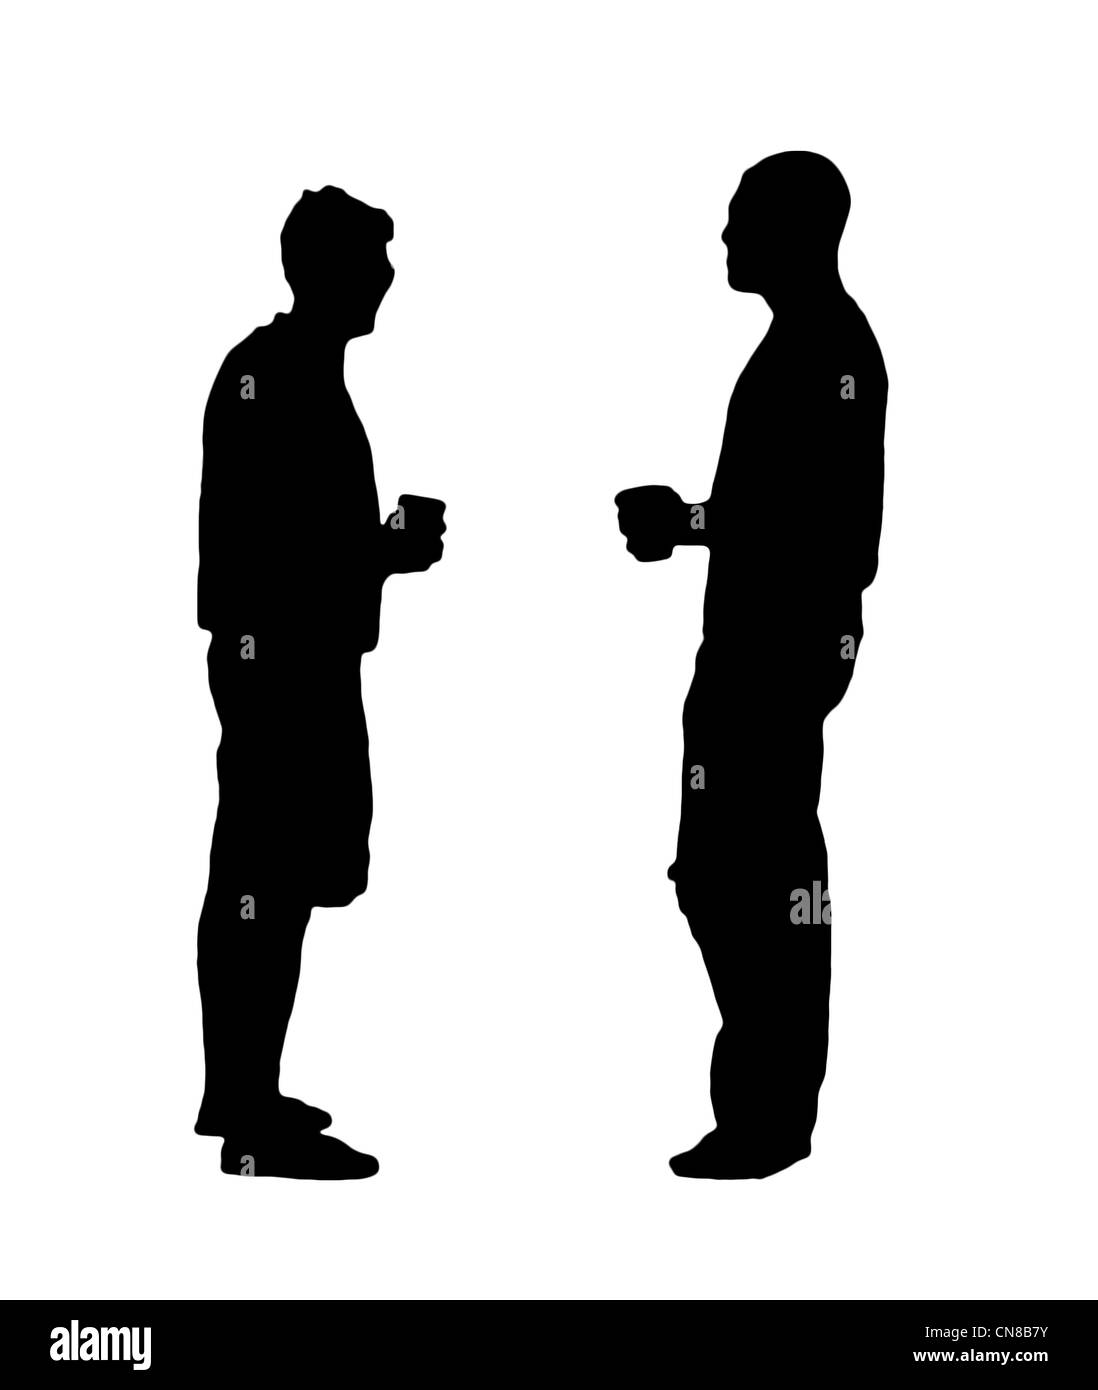 A black and white silhouette of two men drinking beer. Stock Photo